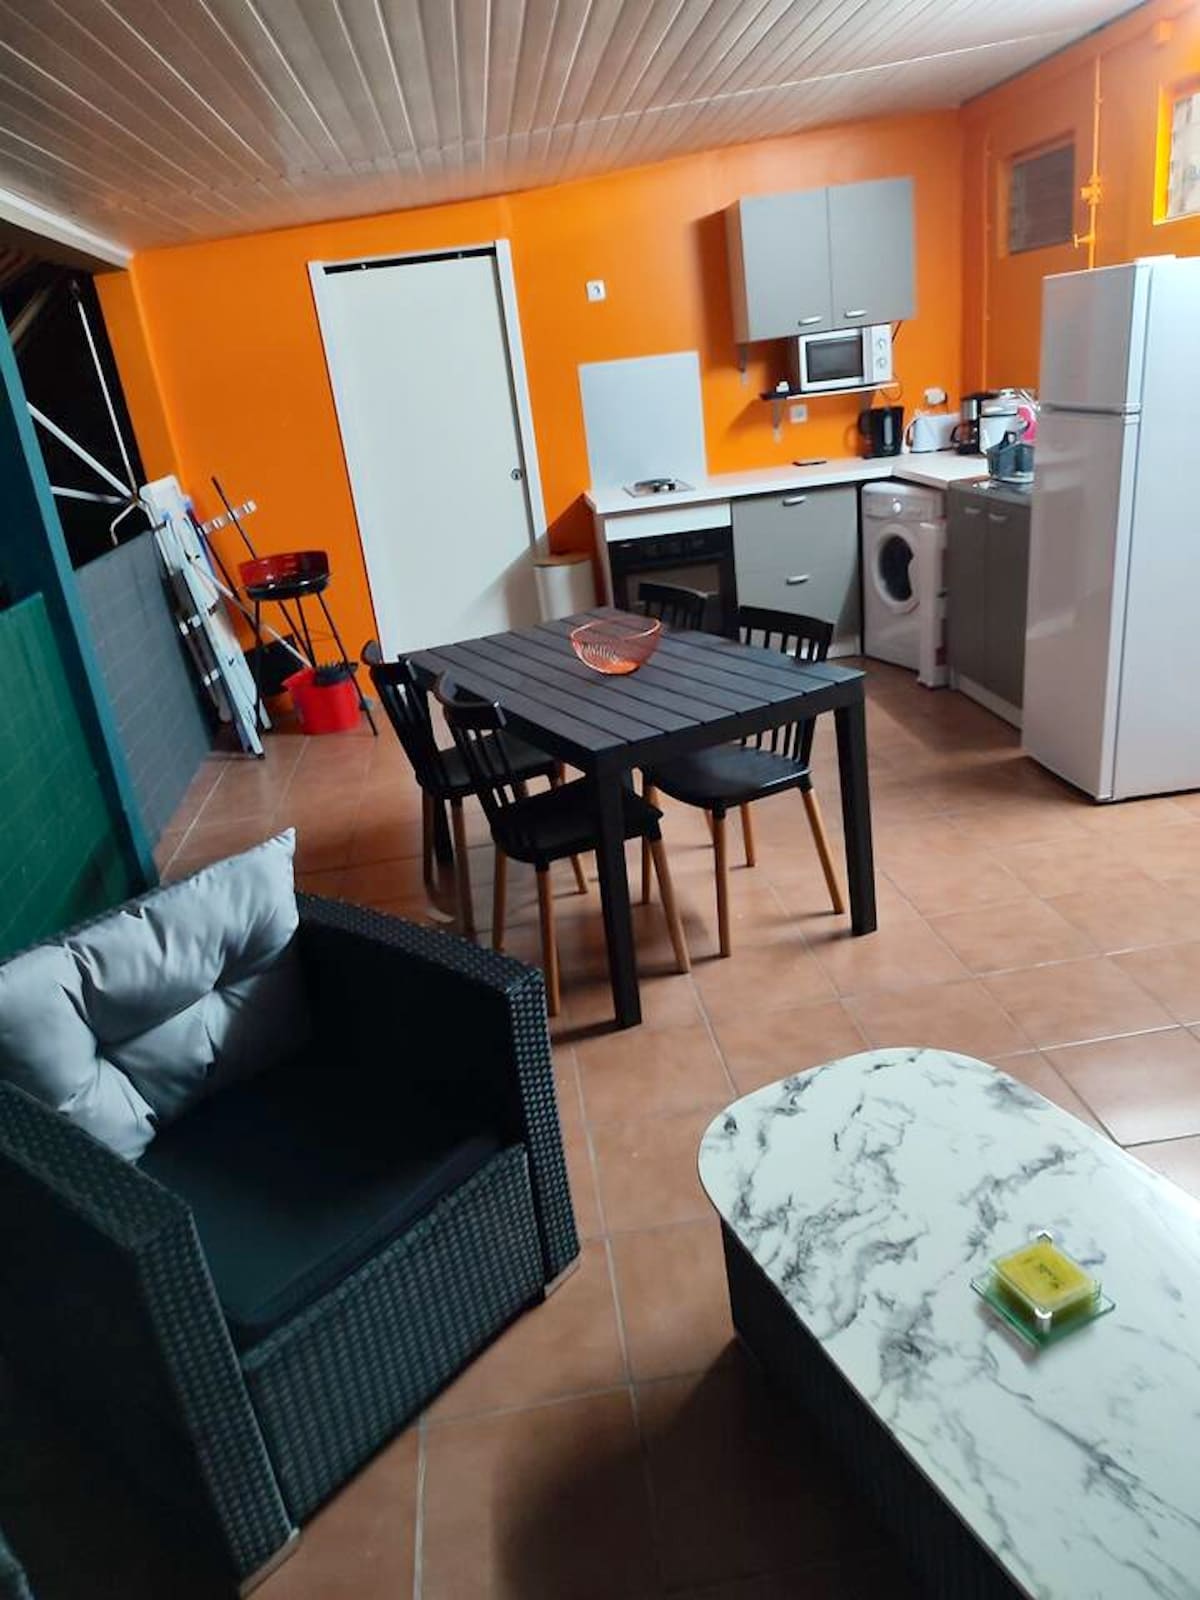 Apartement 5 km away from the beach for 3 ppl.